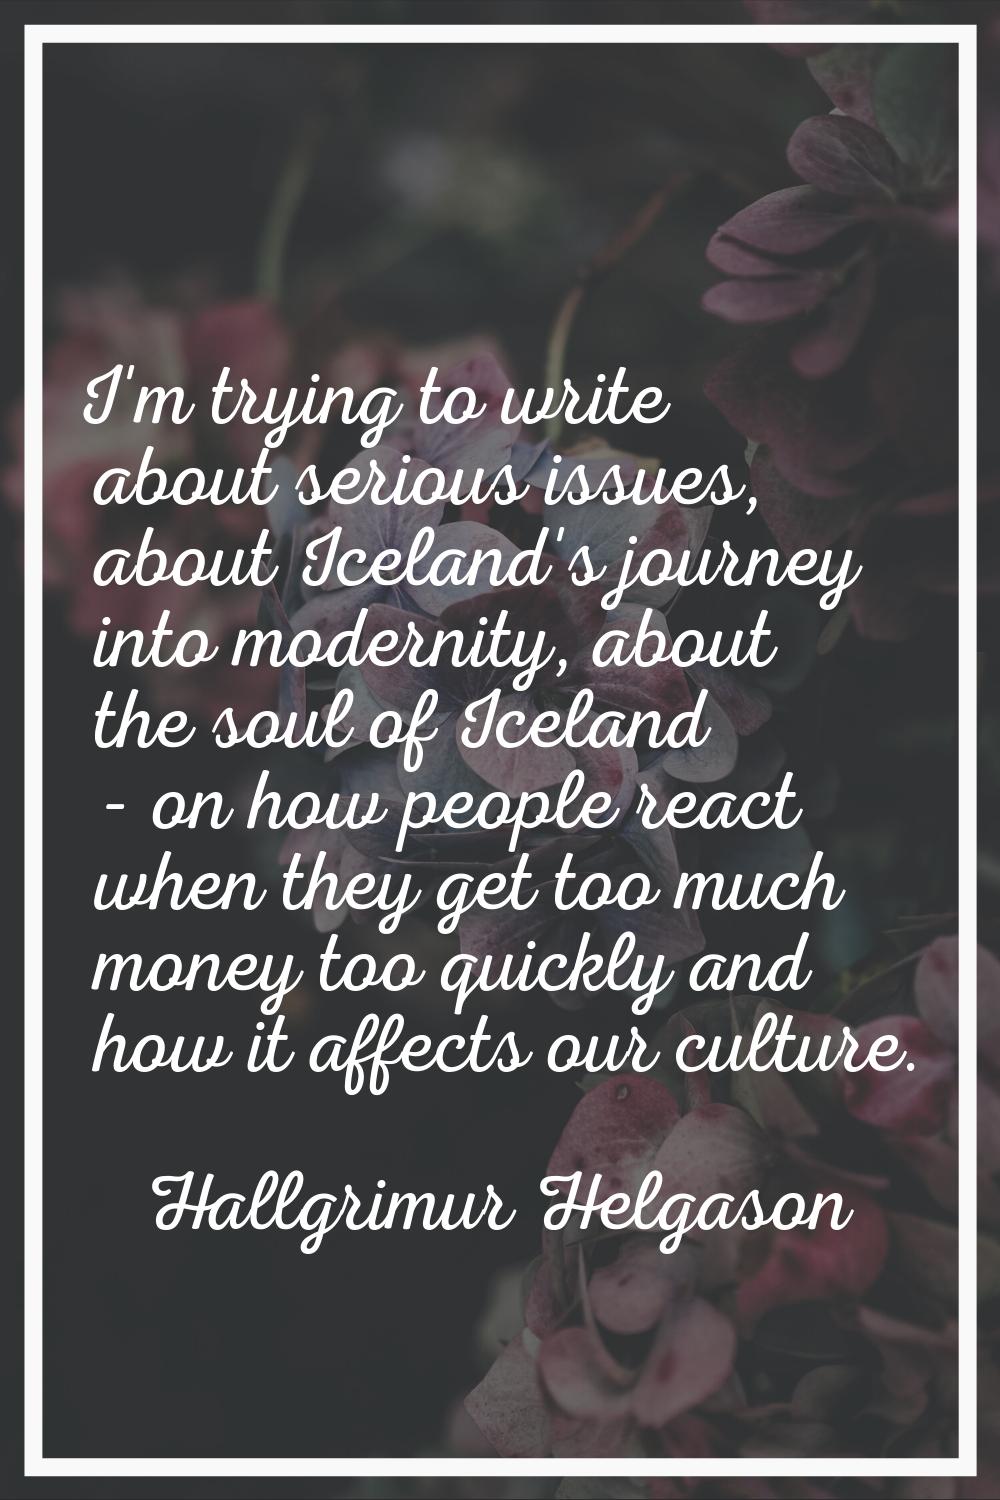 I'm trying to write about serious issues, about Iceland's journey into modernity, about the soul of